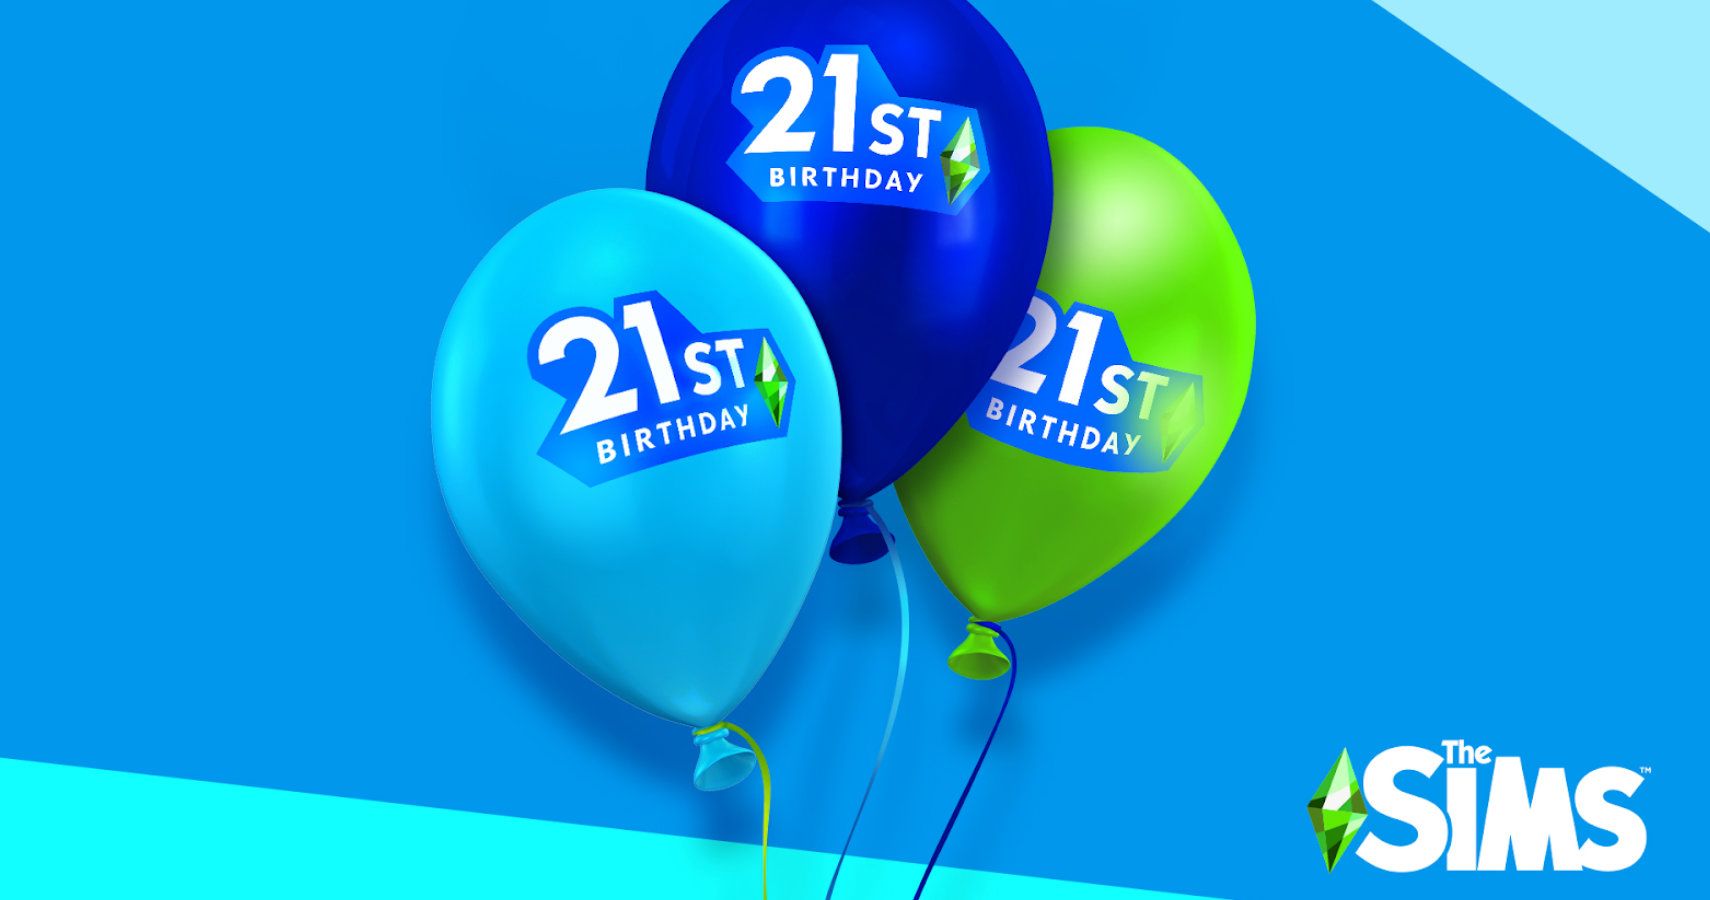 3 balloons with 21st birthday and a plumbob on them against a blue background..